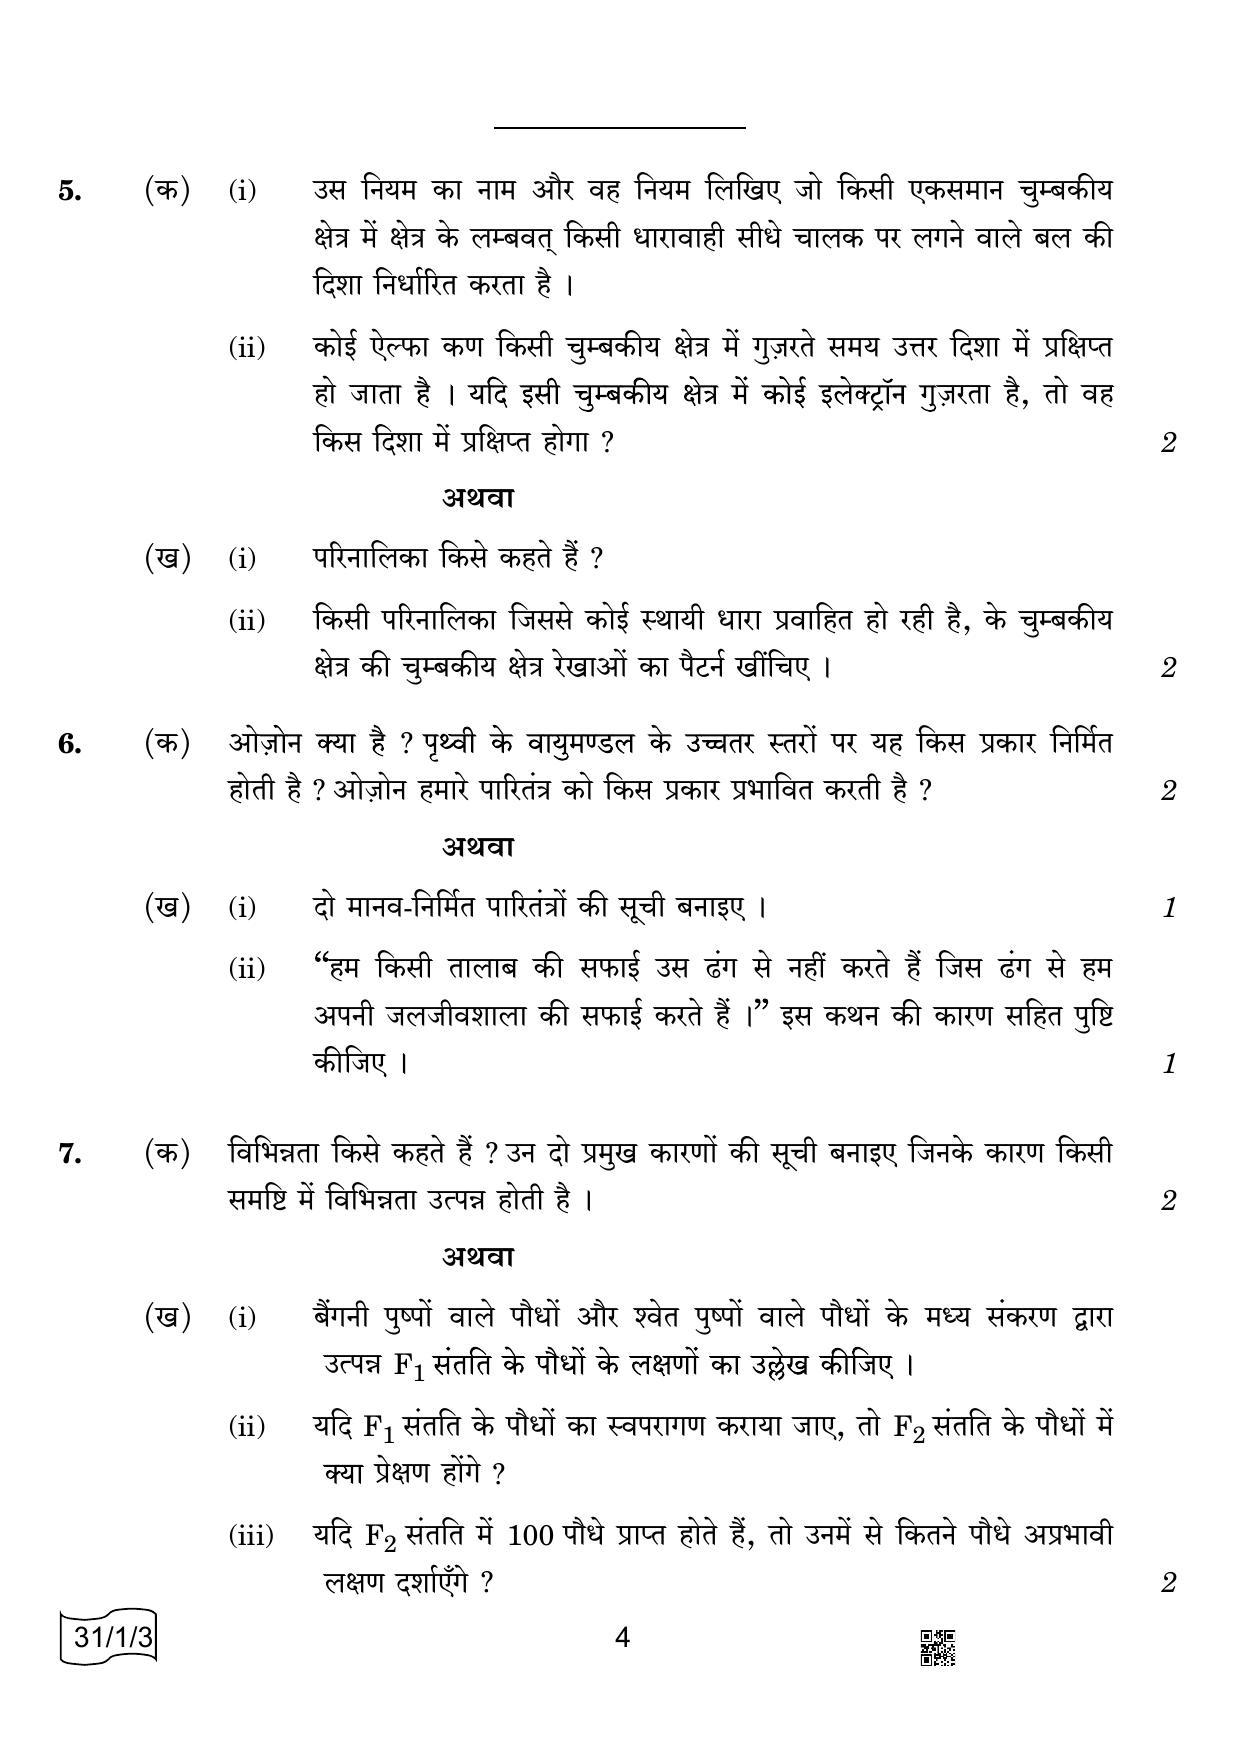 CBSE Class 10 31-1-3 Science 2022 Question Paper - Page 4